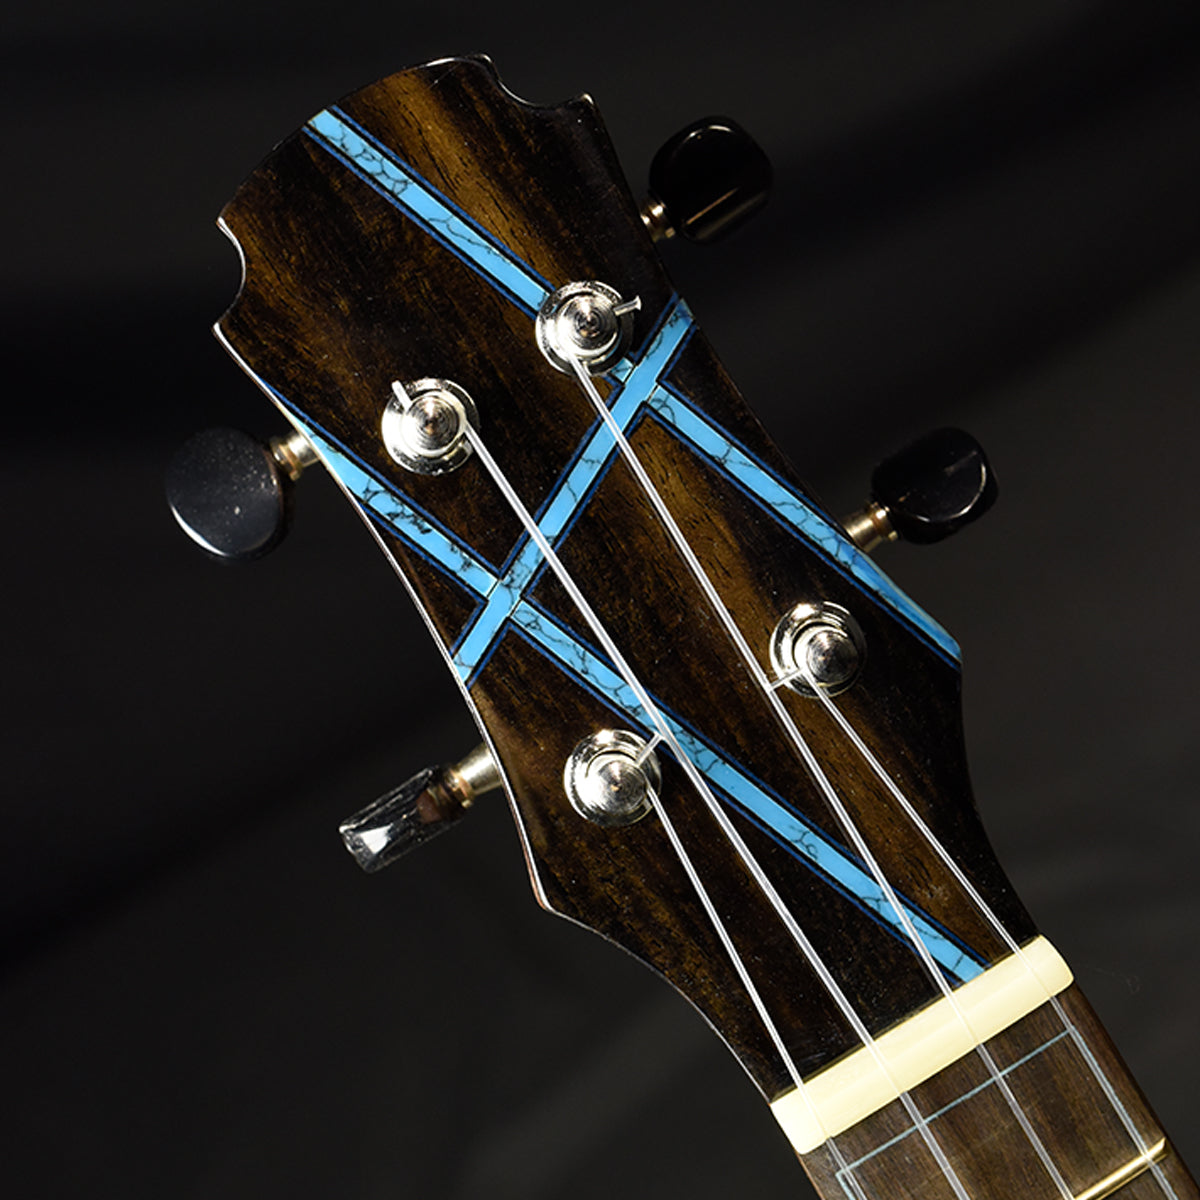 Green Label Tenor German Spruce with Indian Rosewood (Blue)